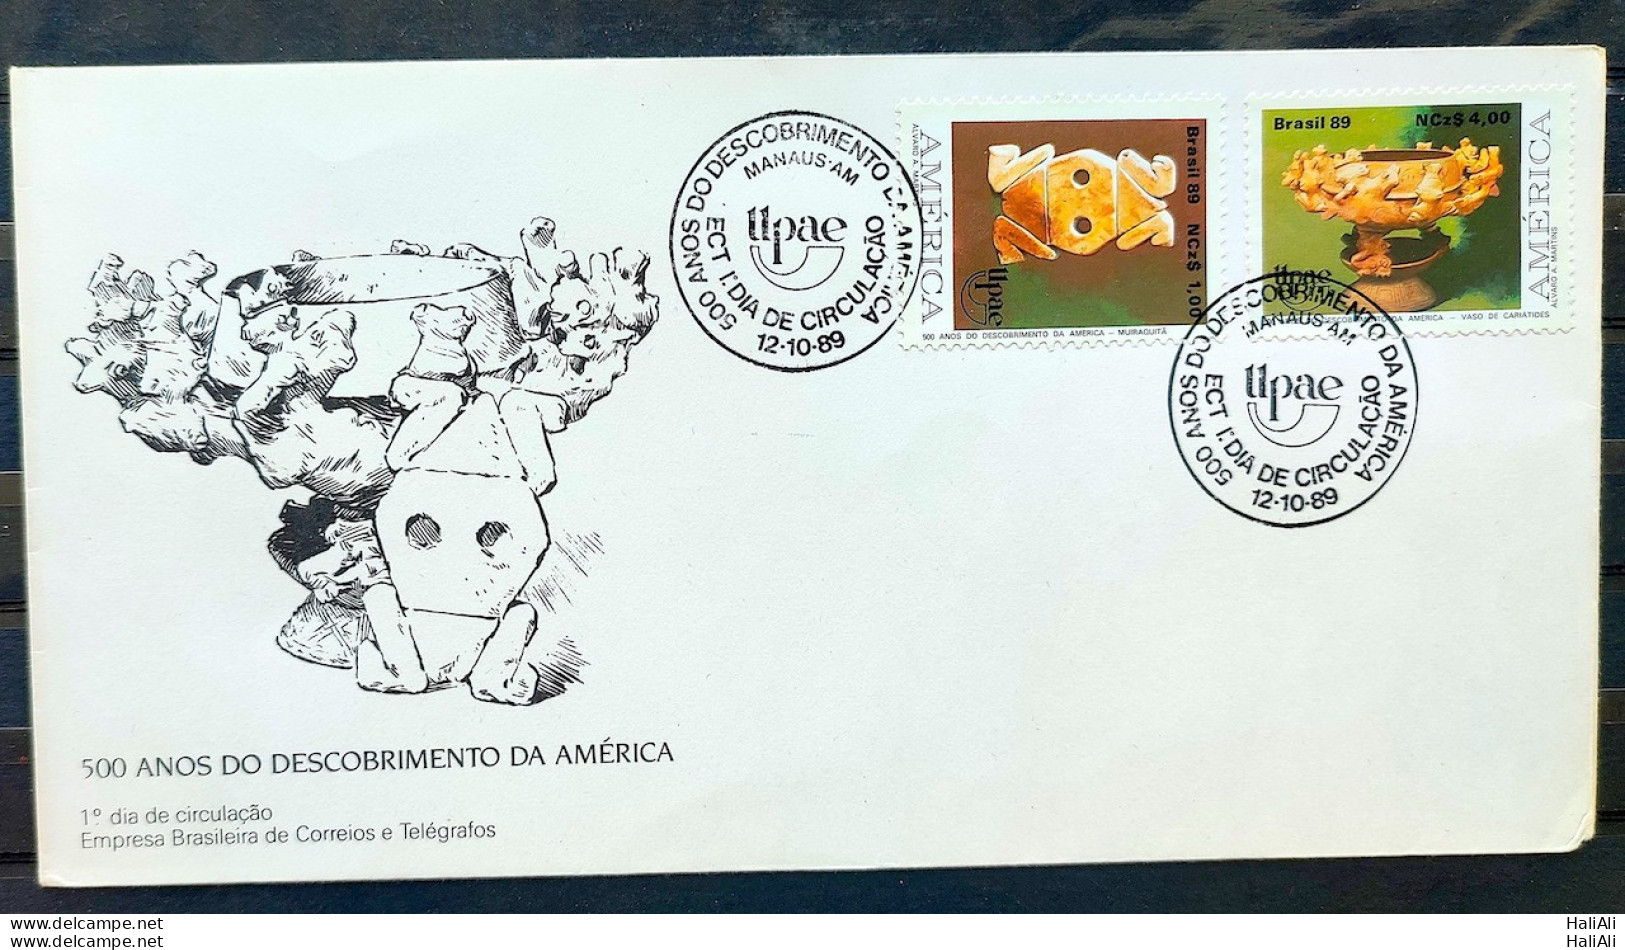 Brazil Envelope FDC 480 1989 Discovery Of America Indian CBC AM 01 - FDC